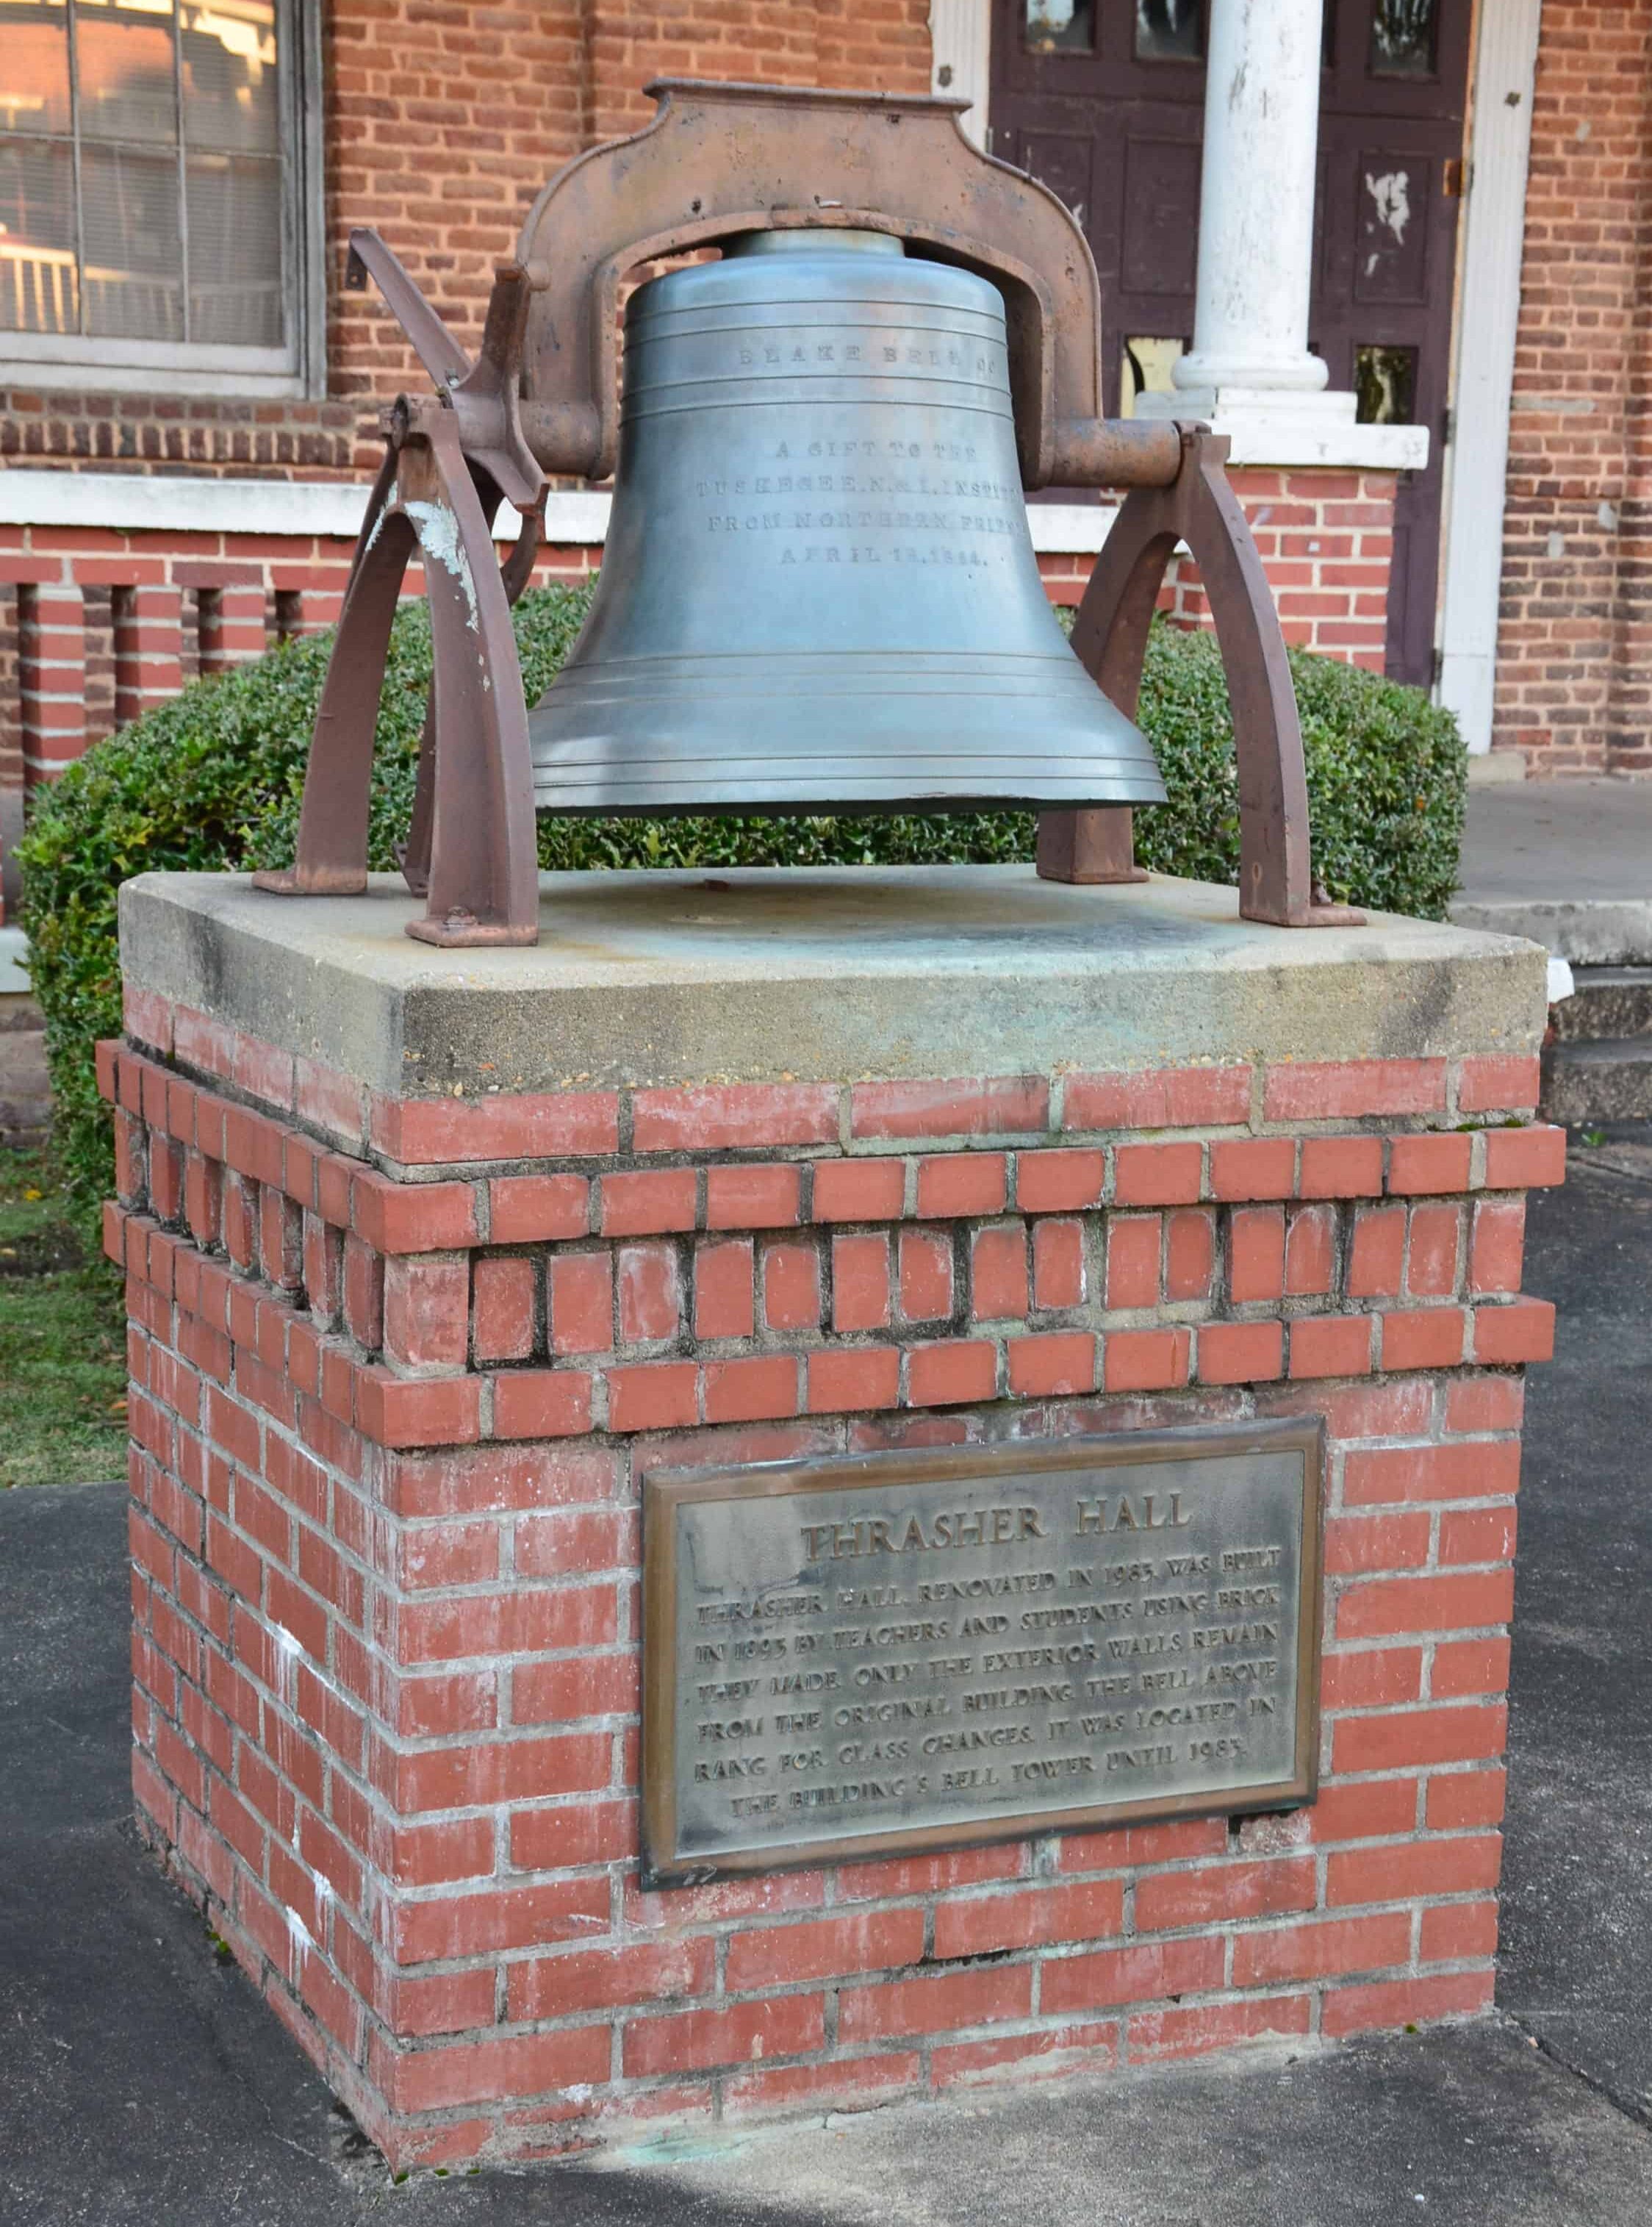 Bell from Thrasher Hall at Tuskegee Institute National Historic Site, Tuskegee University, Alabama